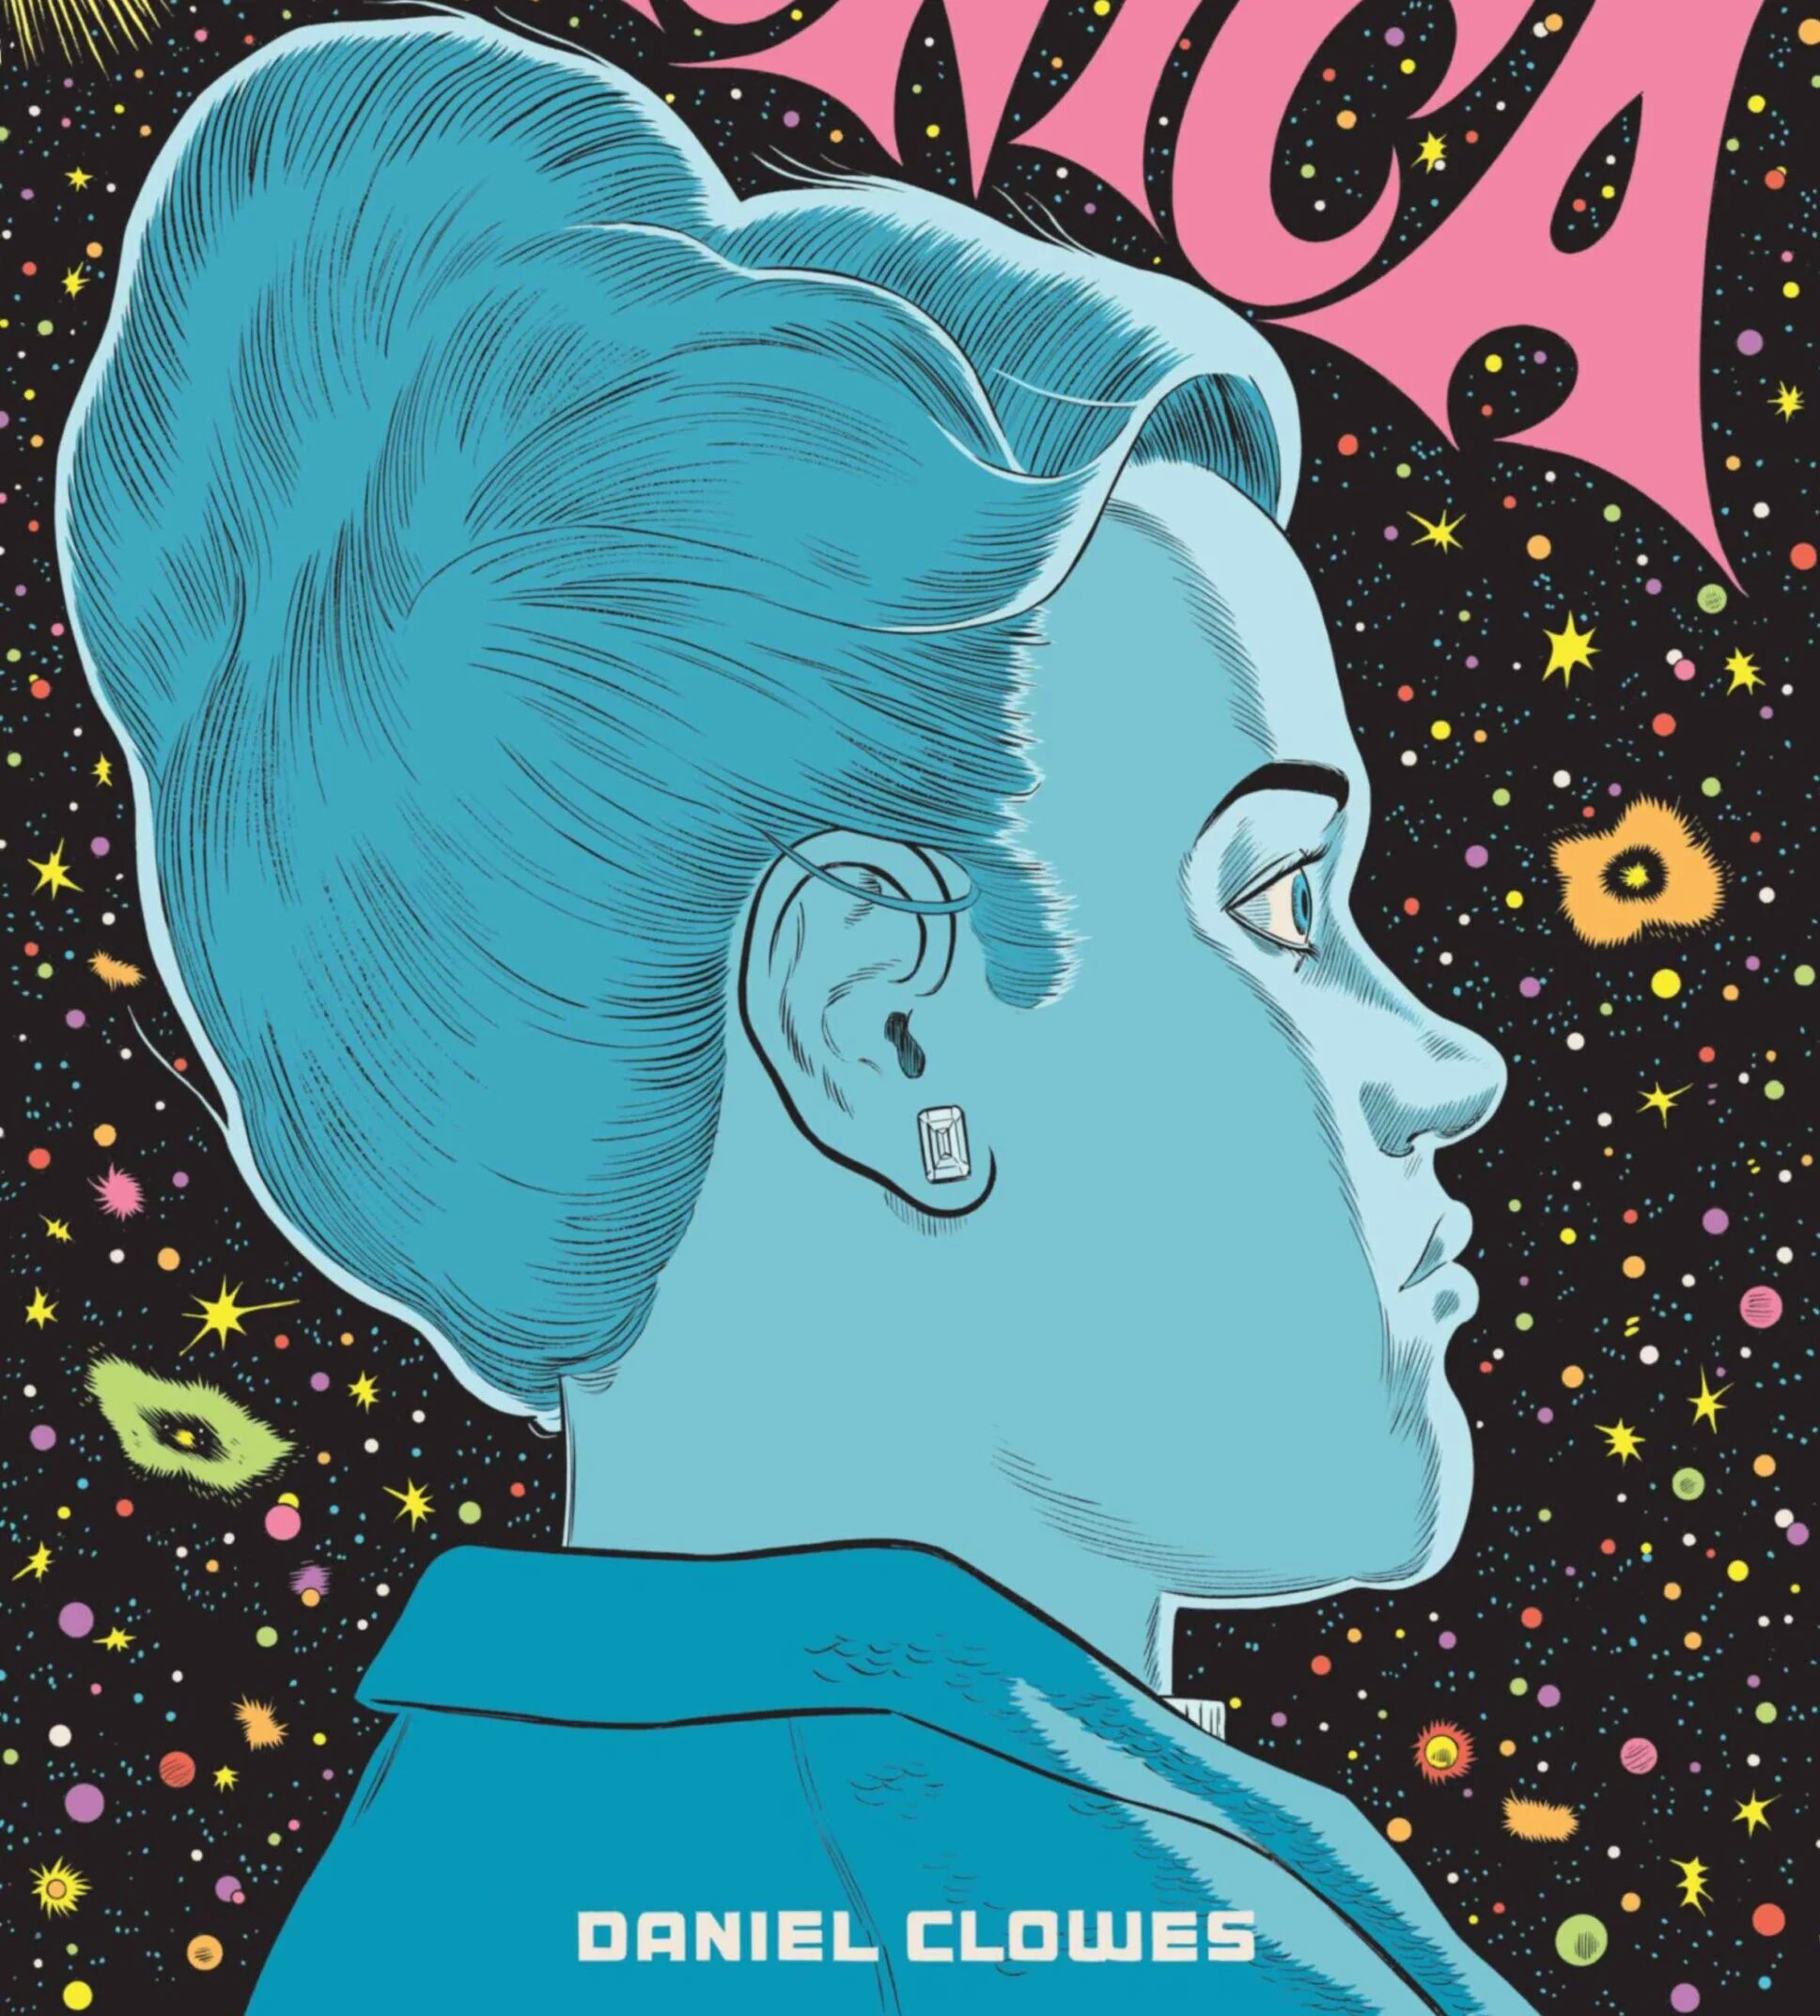 Monica, by Daniel Clowes | Life is a discovery that cannot be trusted